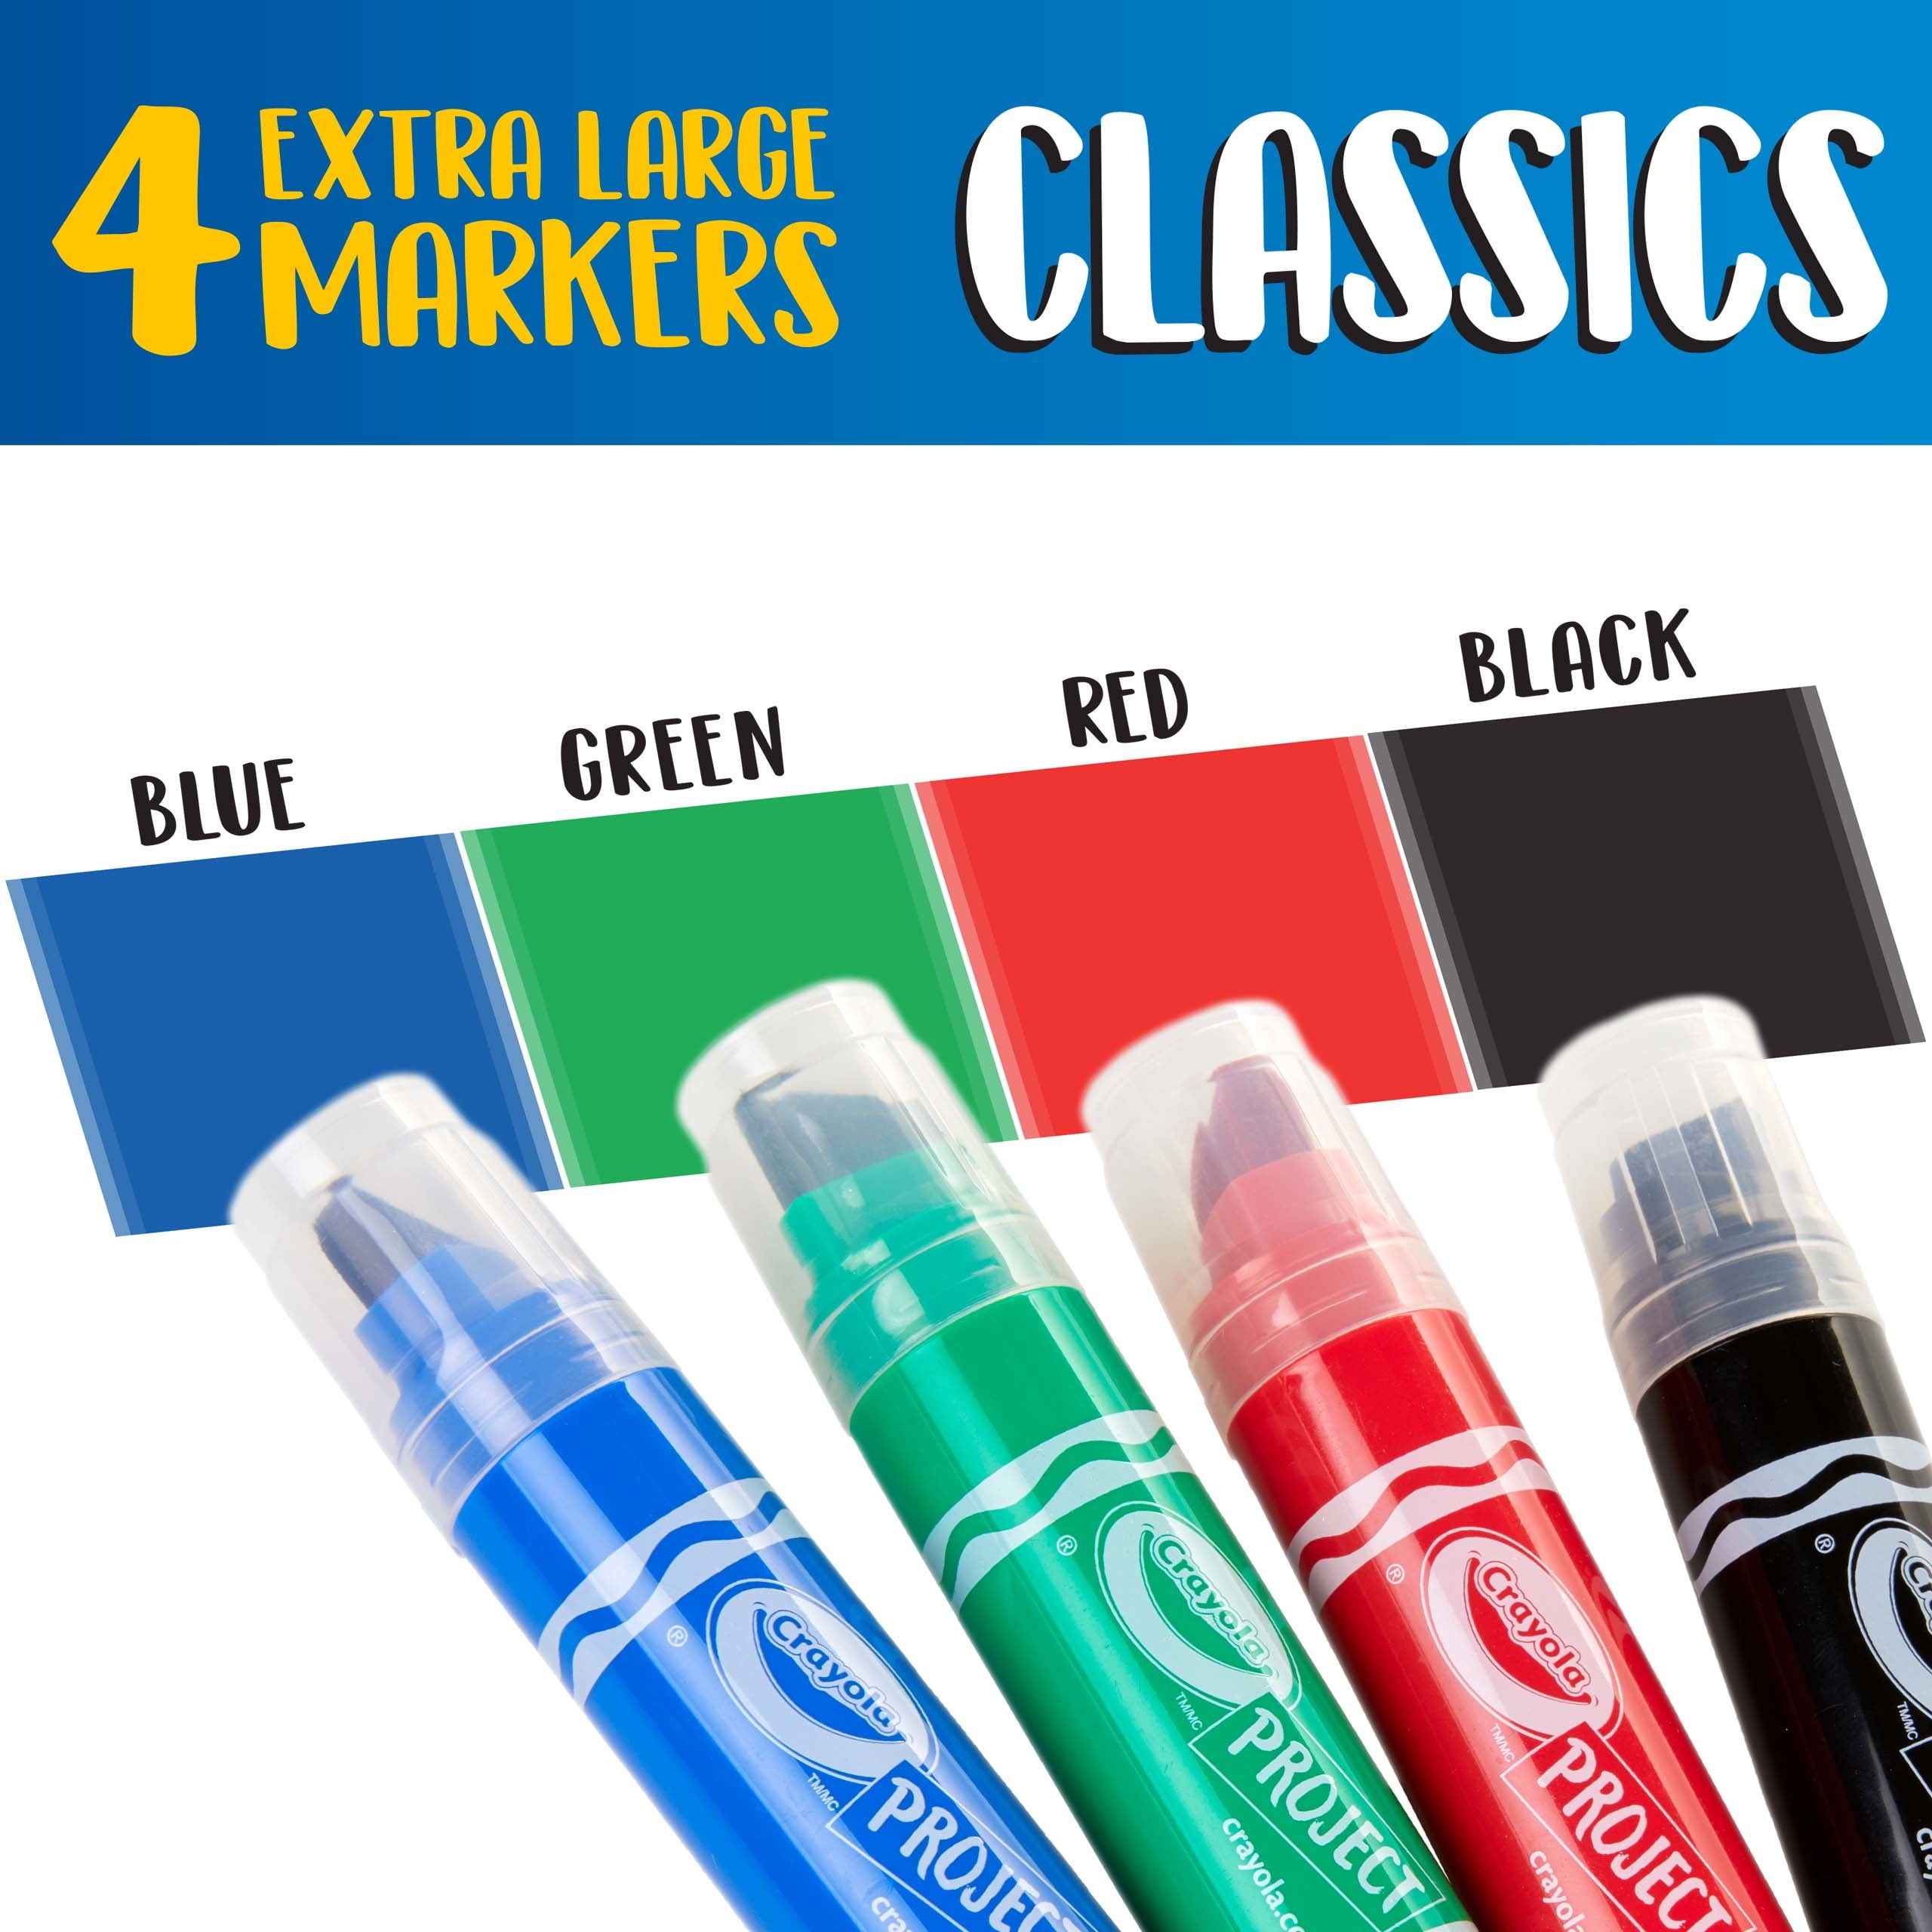 TeachersParadise - Crayola® Project XL Poster Markers, Classic, 4 Count -  BIN588356